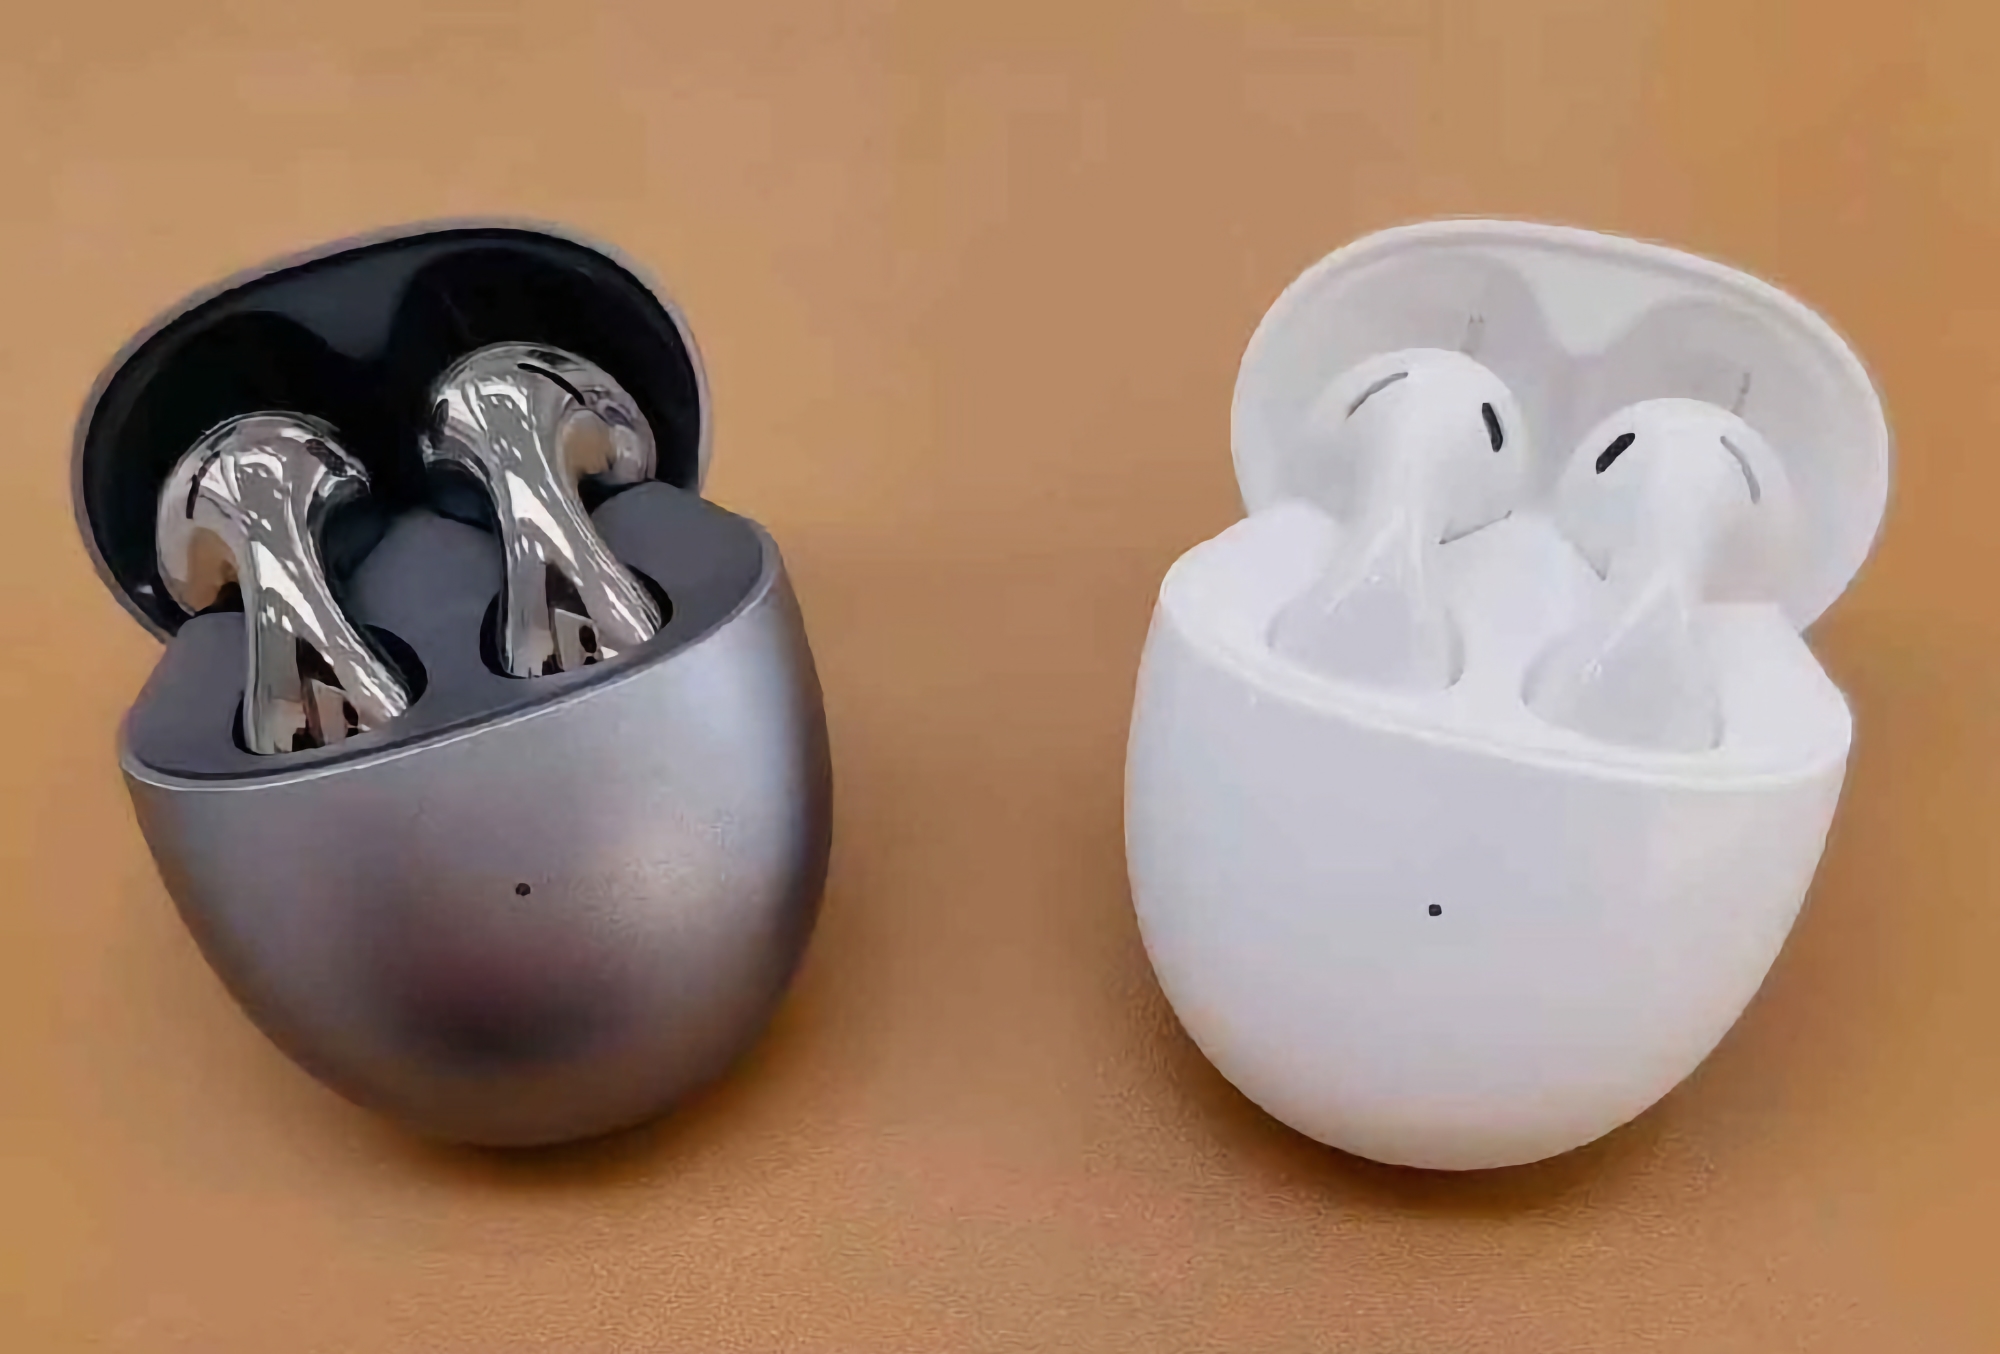 Here's what FreeBuds 5 will look like: Huawei's new TWS earbuds with an unusual design